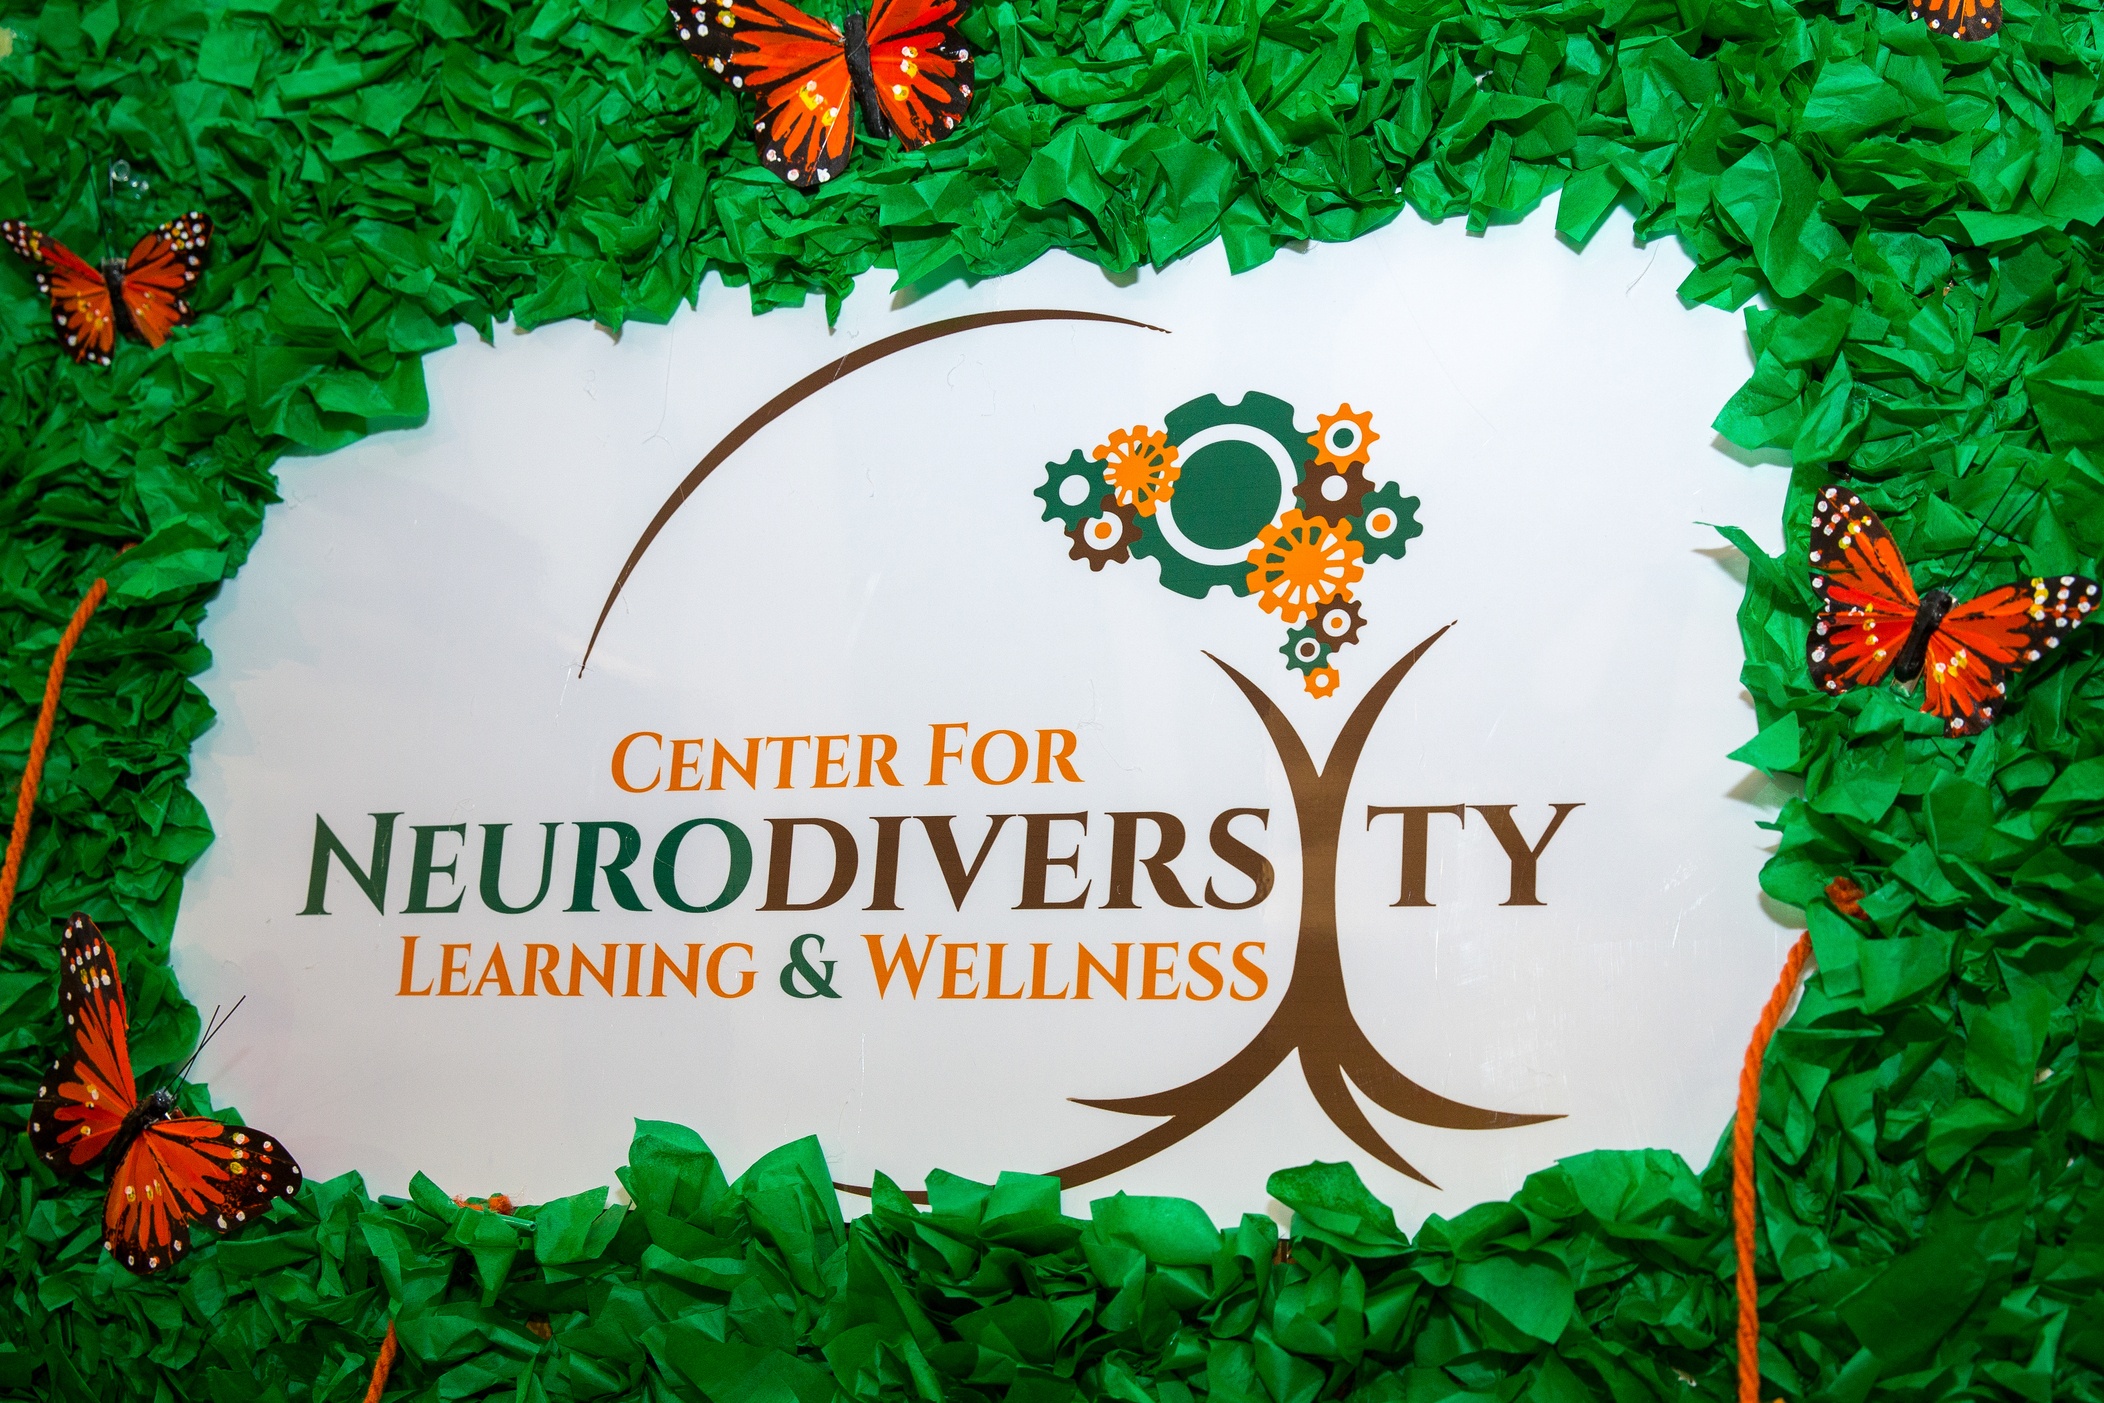 Sign for the Center for Neurodiversity, Learning, and Wellness